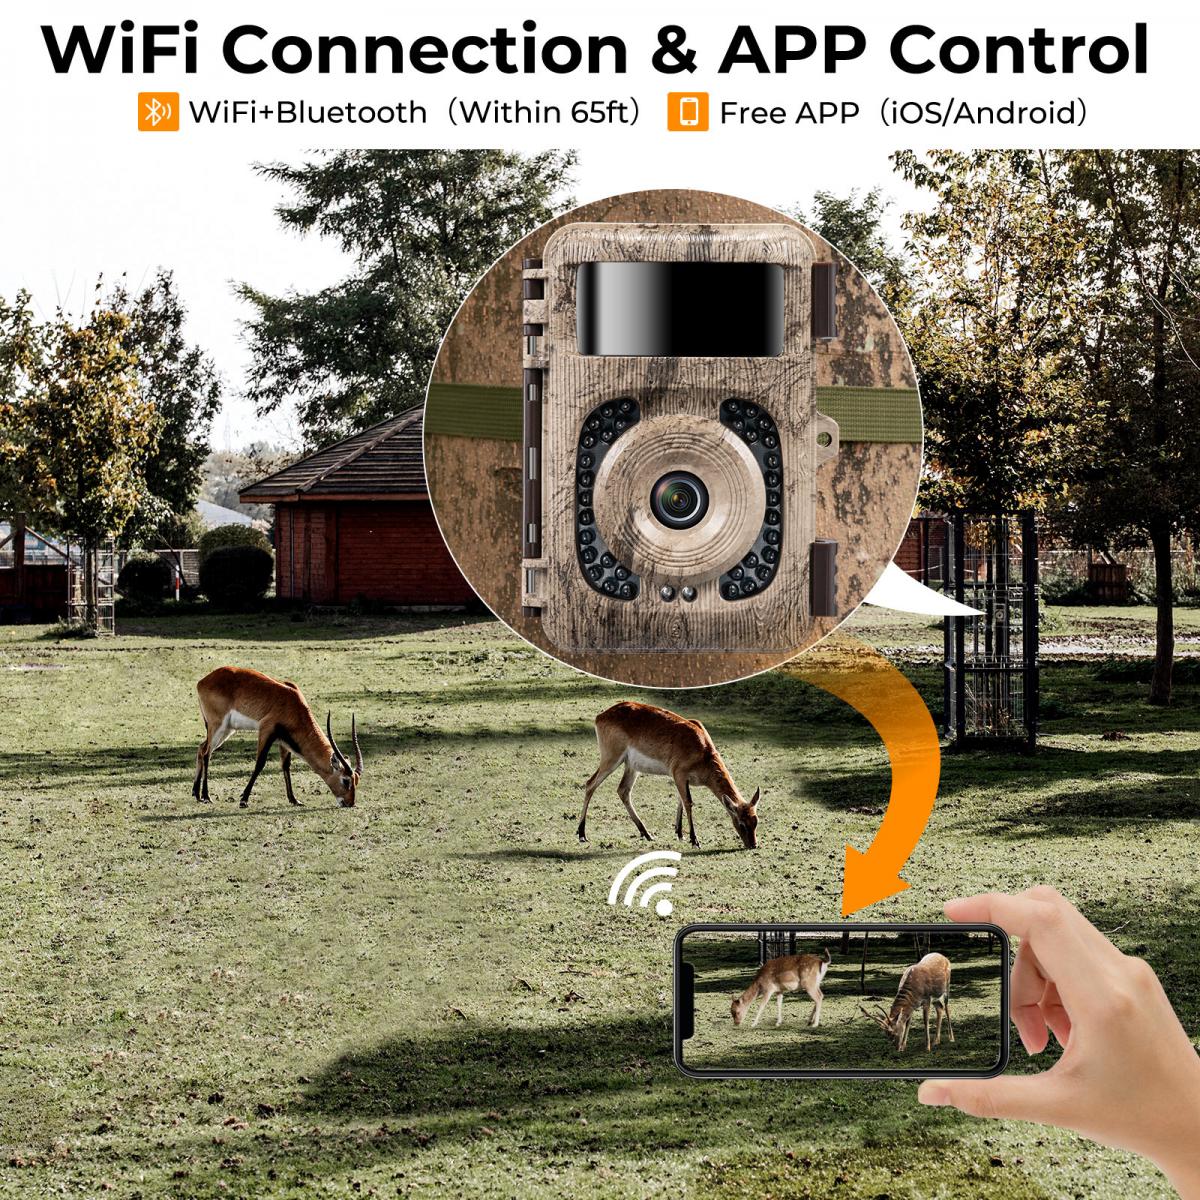 WiFi tools for AST8300A Cameras